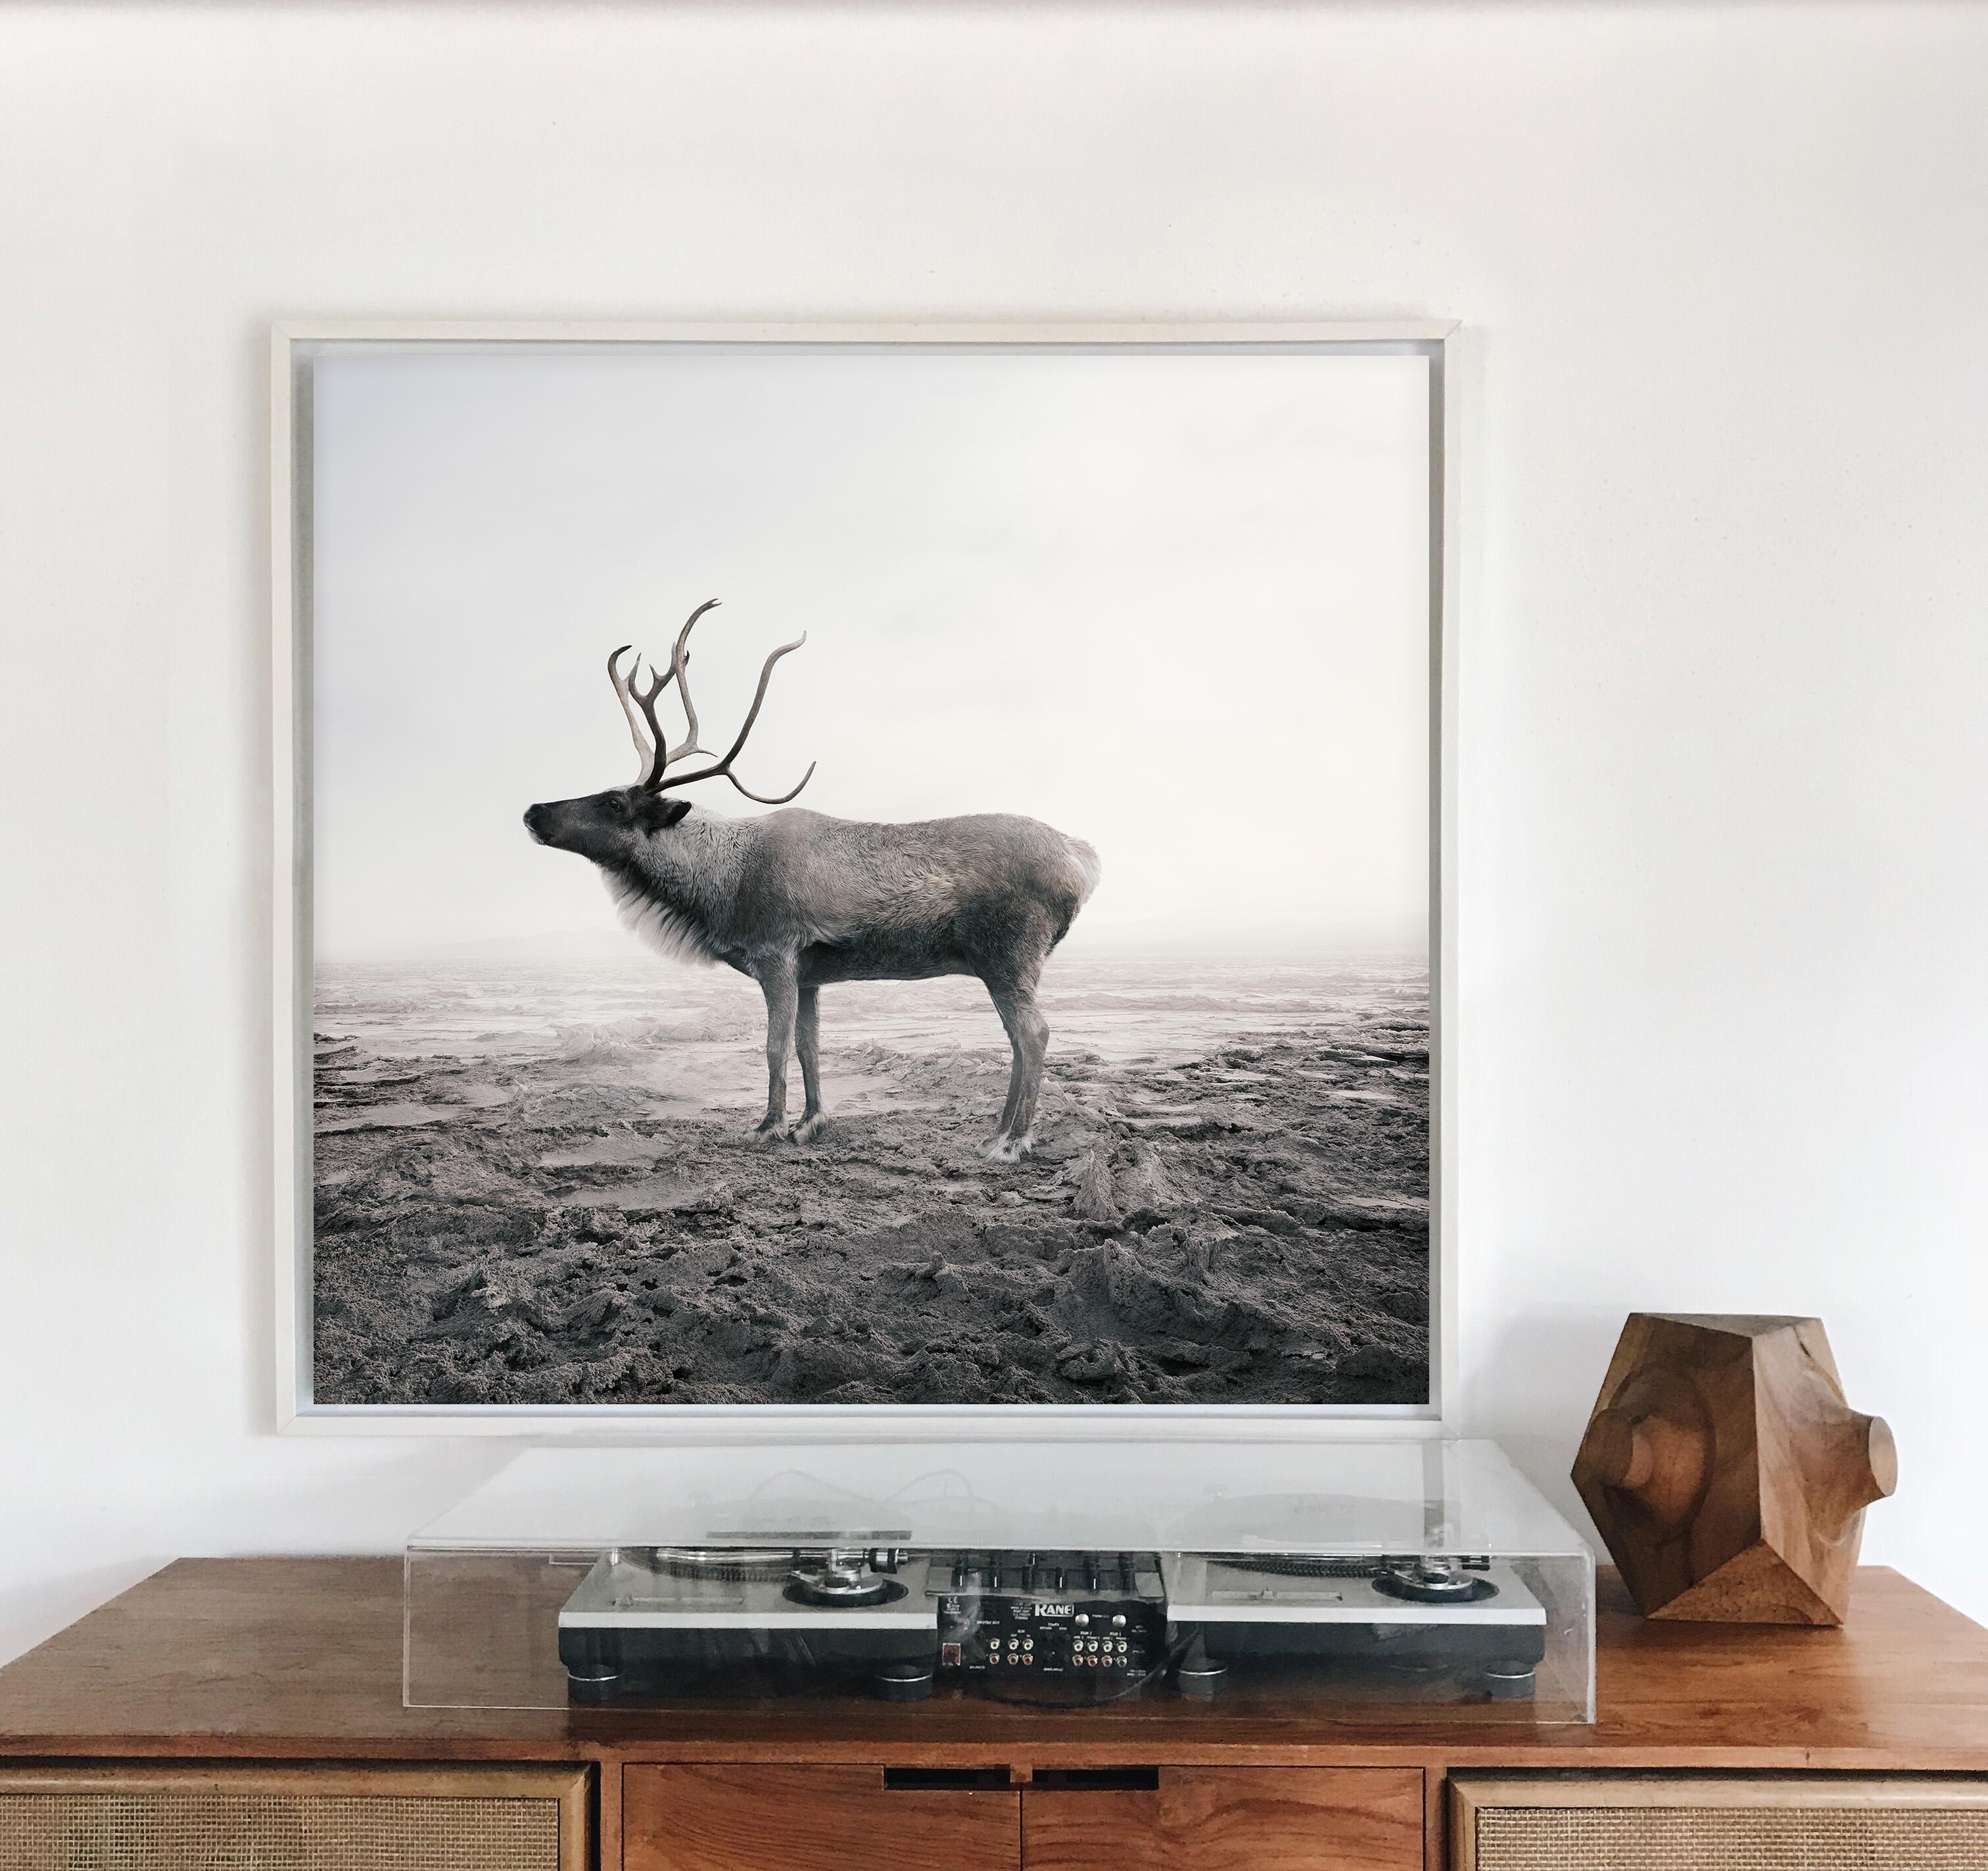 Calm Caribou - Photograph by Alice Zilberberg